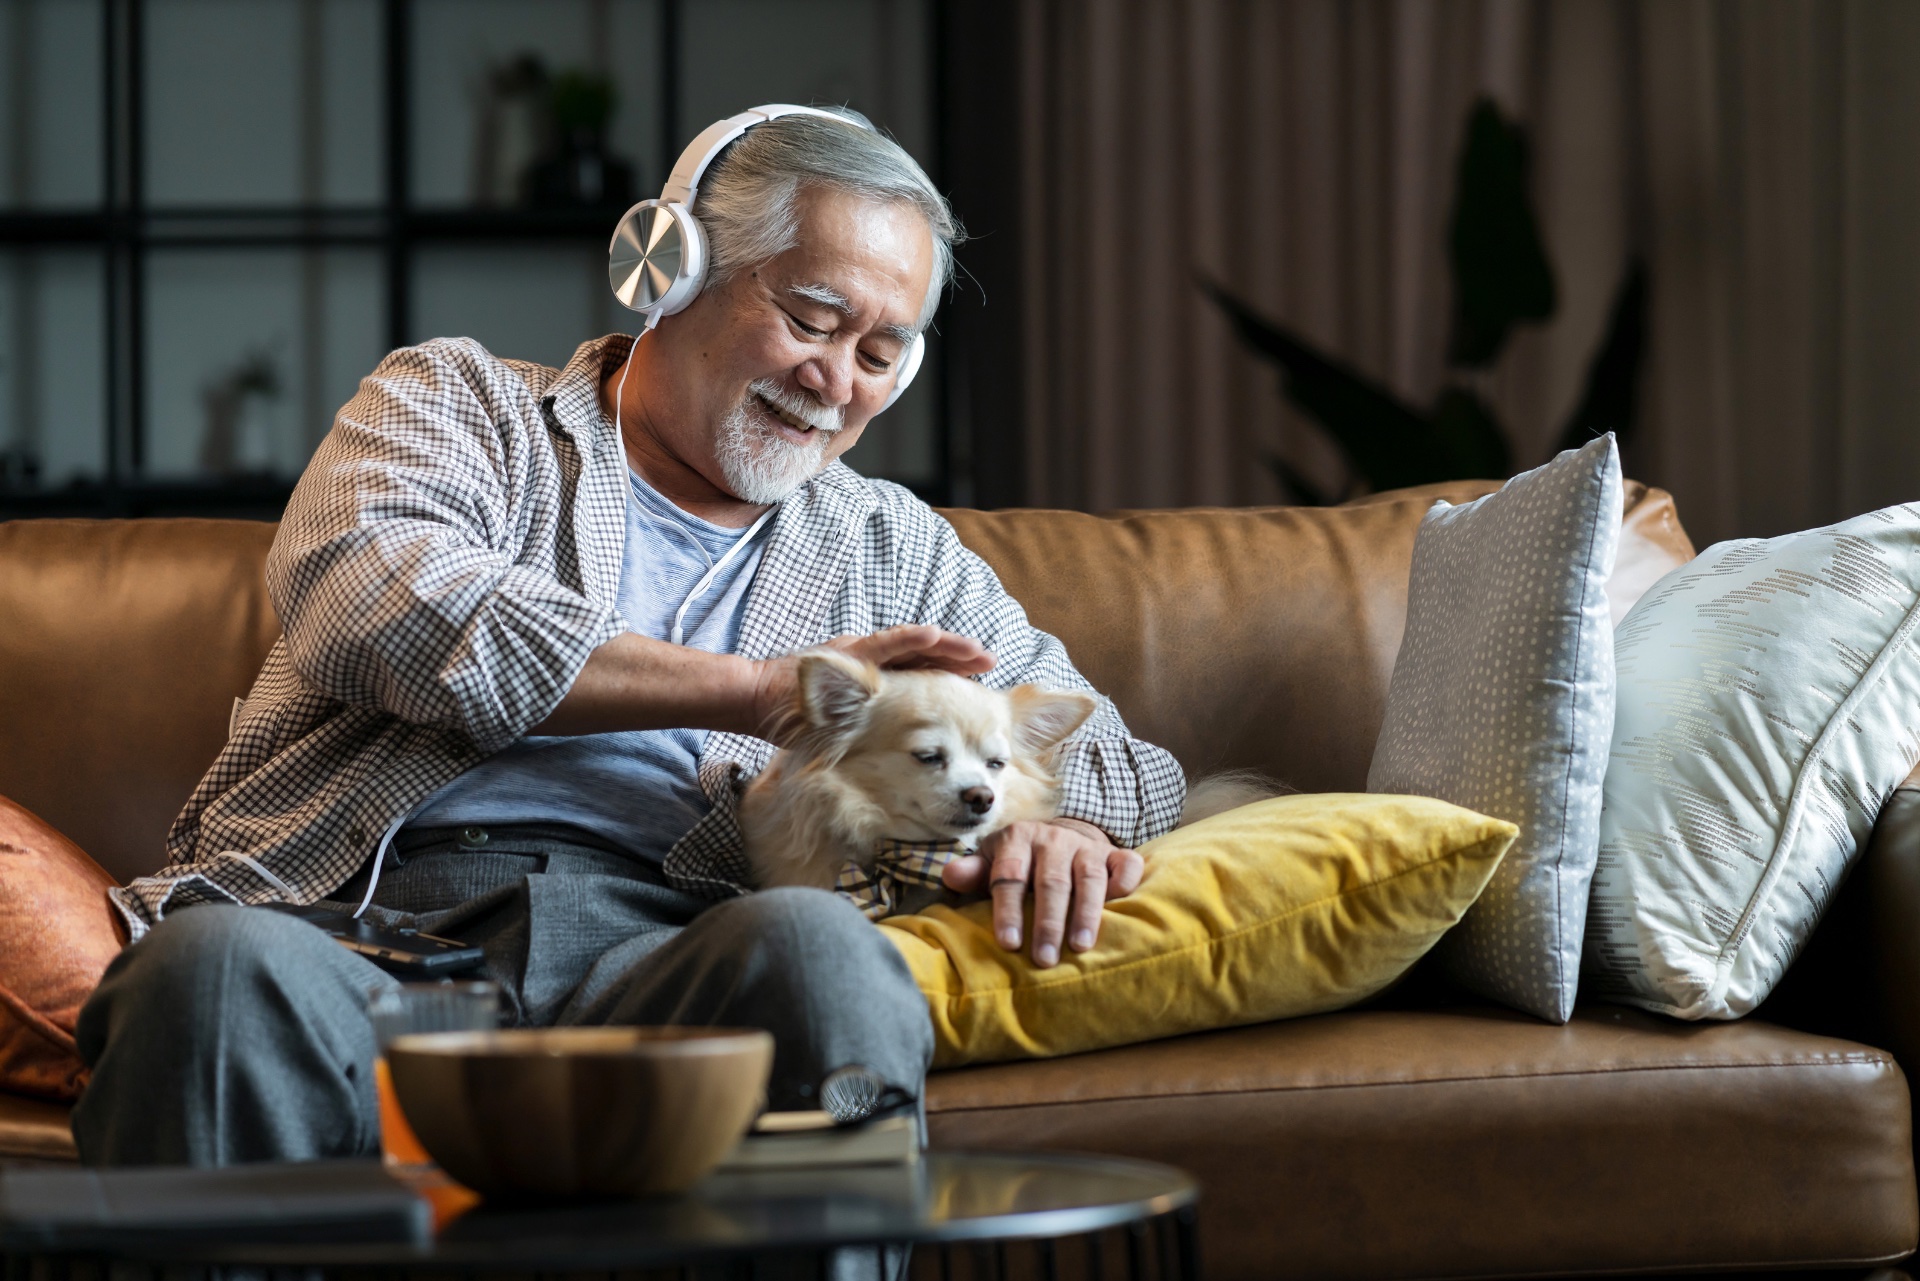 Listening to music with an older dog